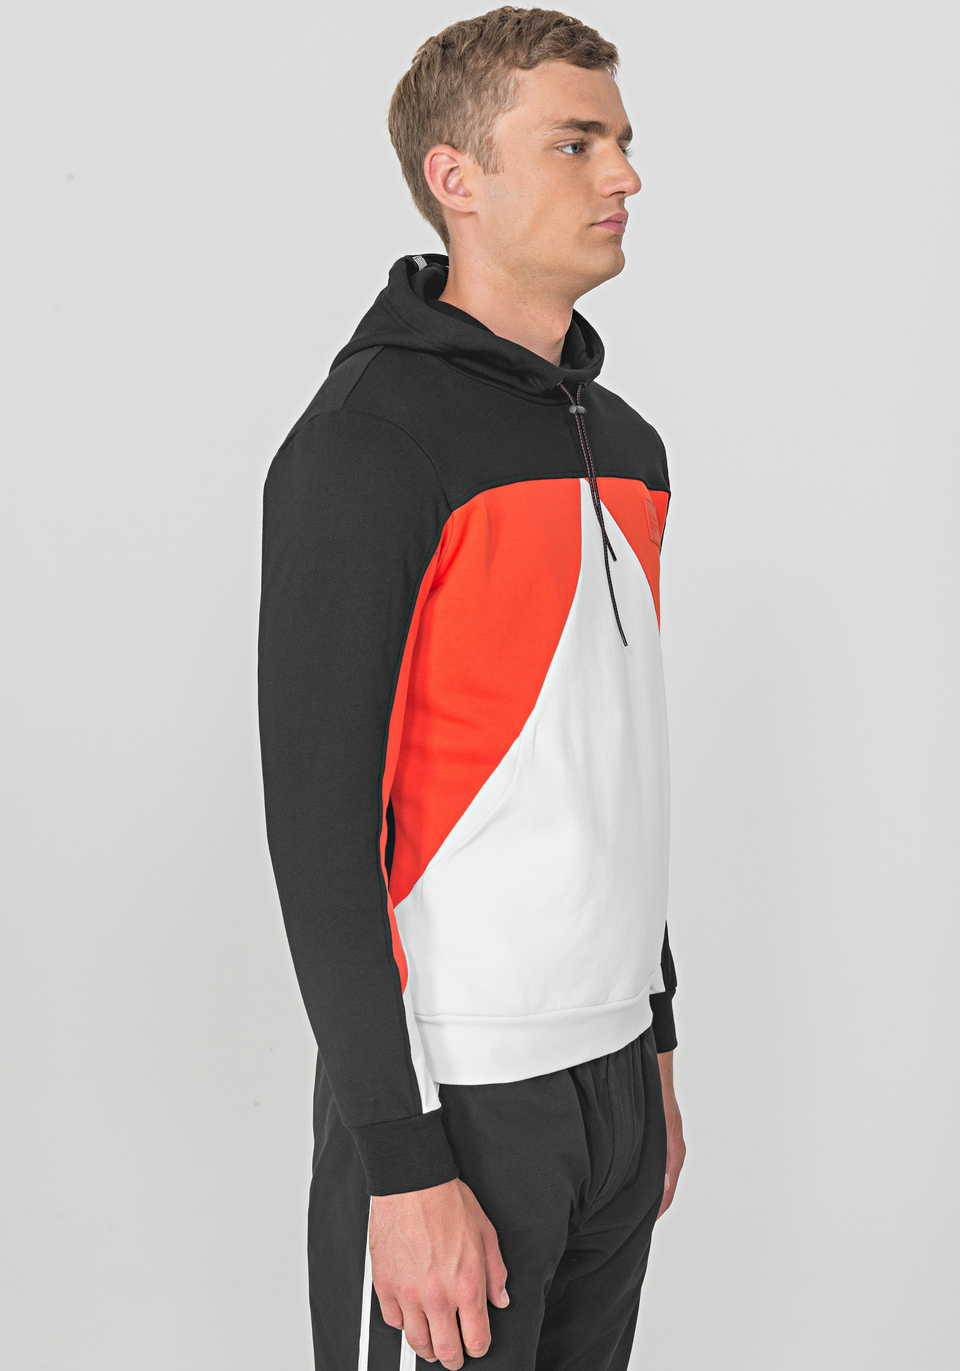 SWEATSHIRT WITH ASYMMETRICAL CONTRASTS AND CONCEALED POCKETS - Antony Morato Online Shop